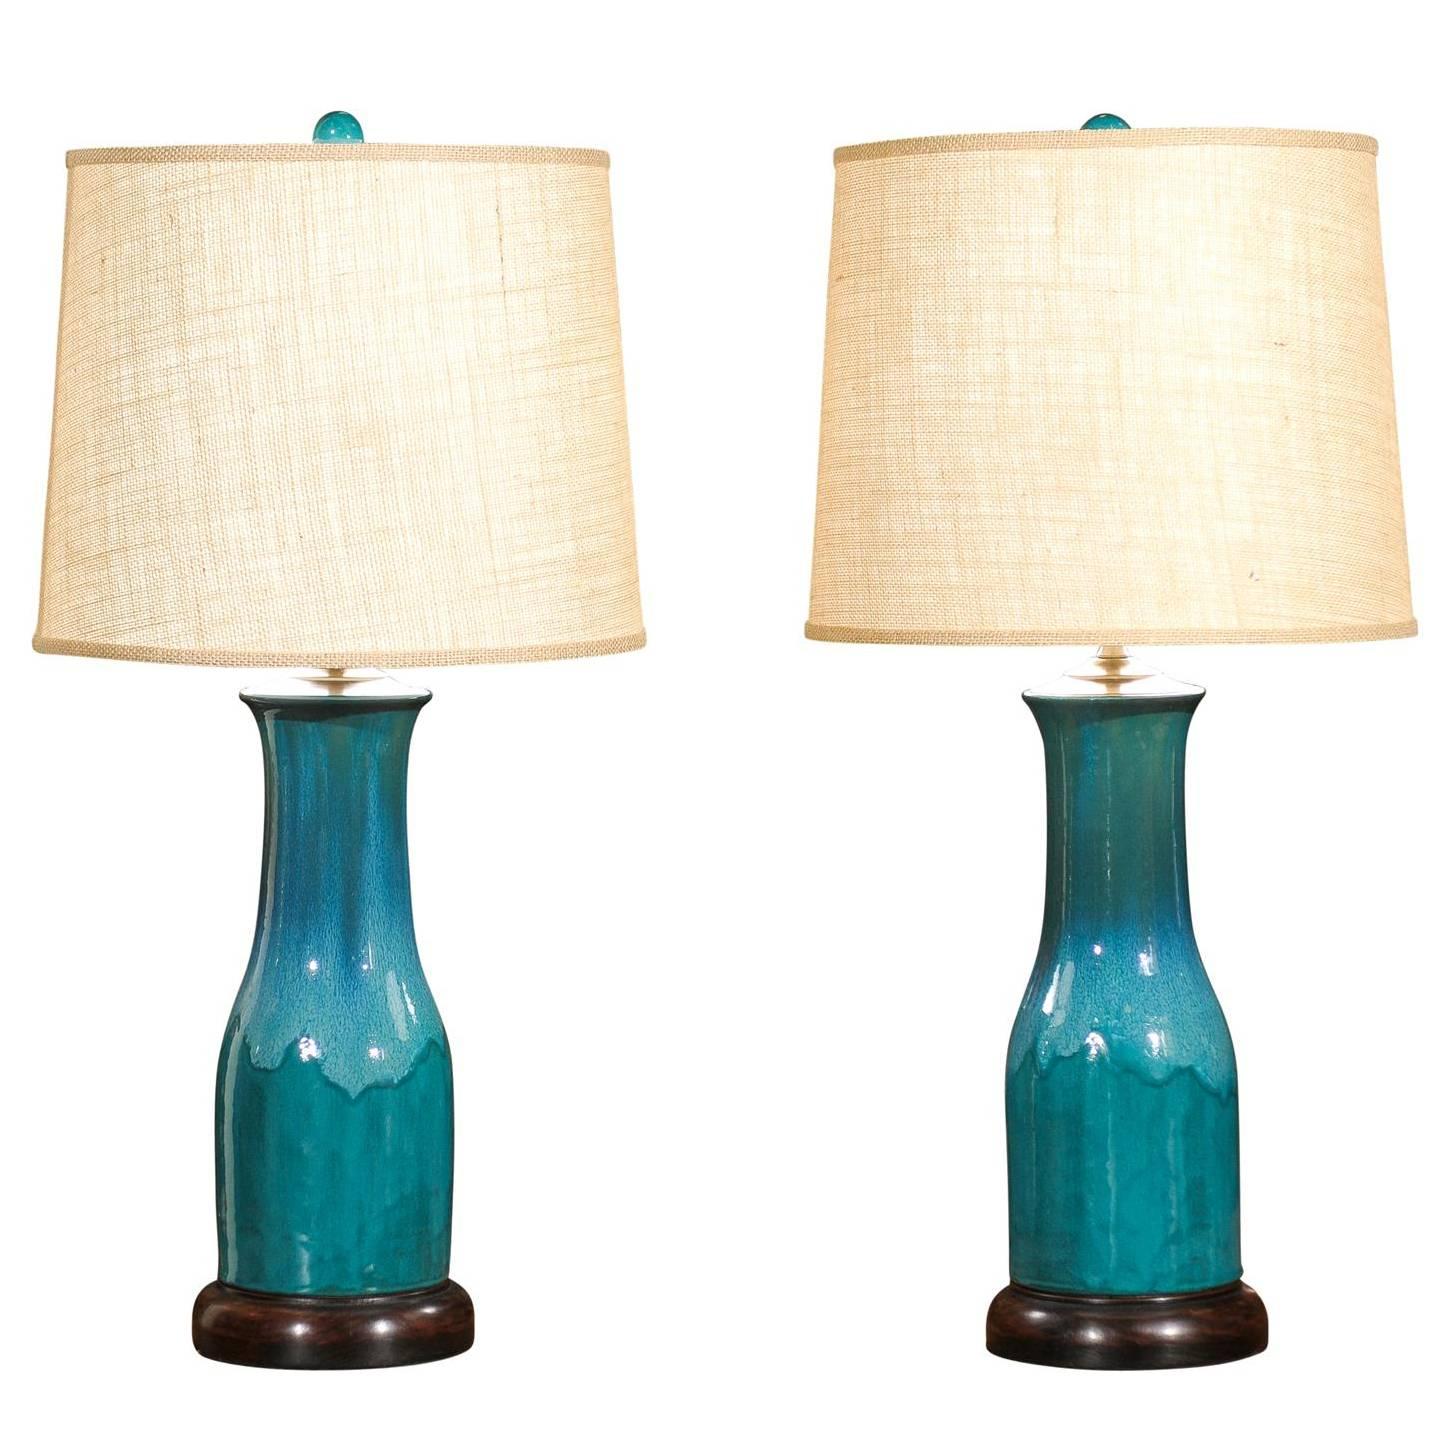 Charlie West Pottery Lamps